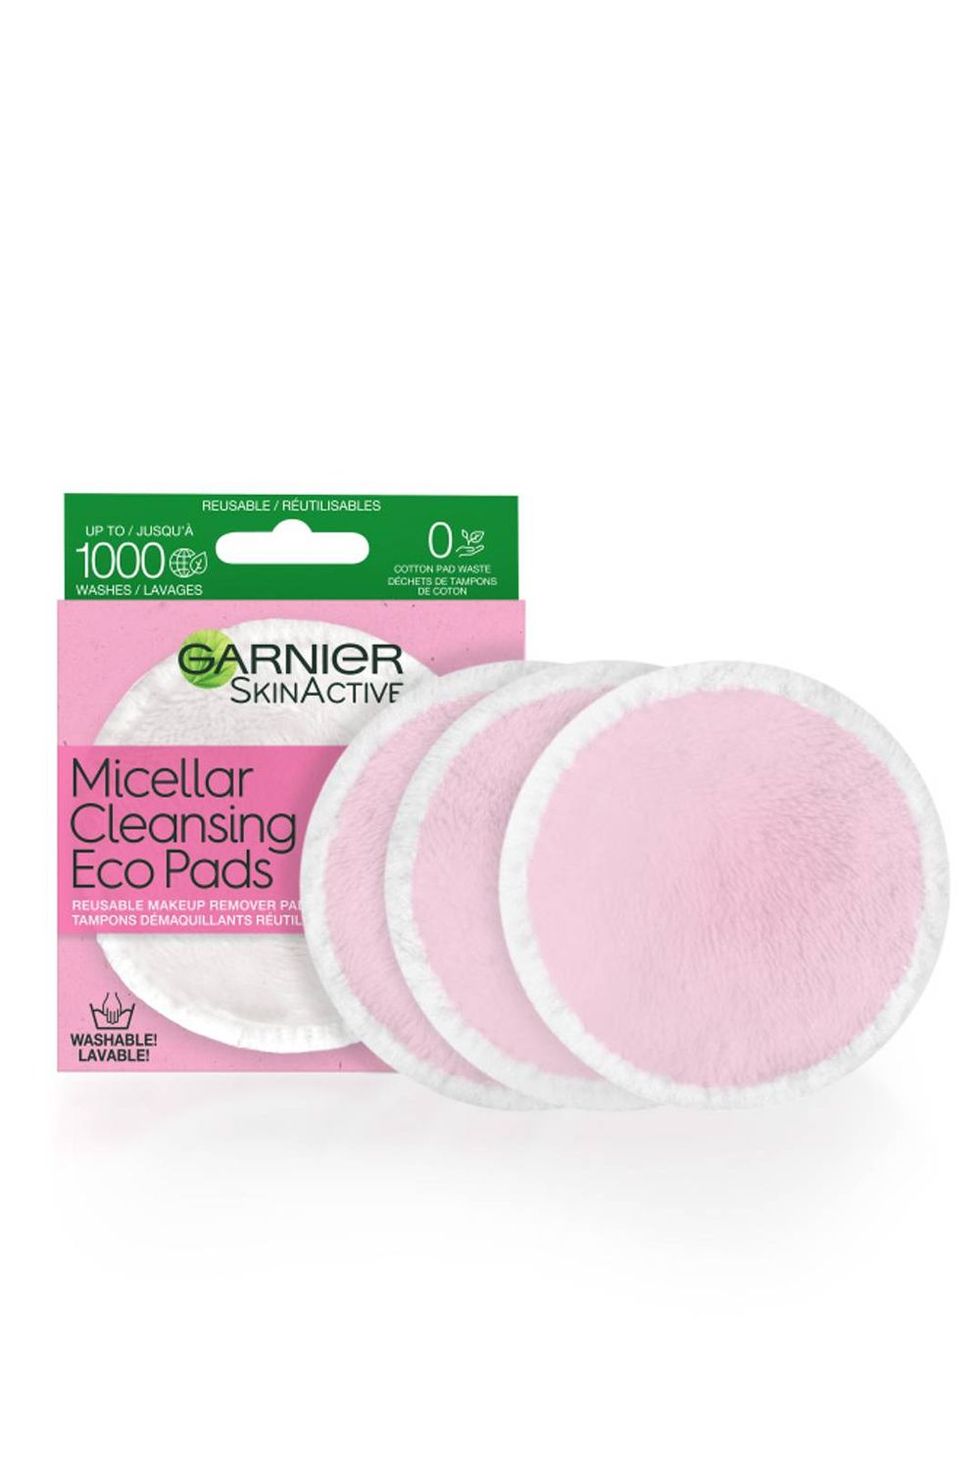 9 Best Reusable Cotton Rounds and Makeup Removing